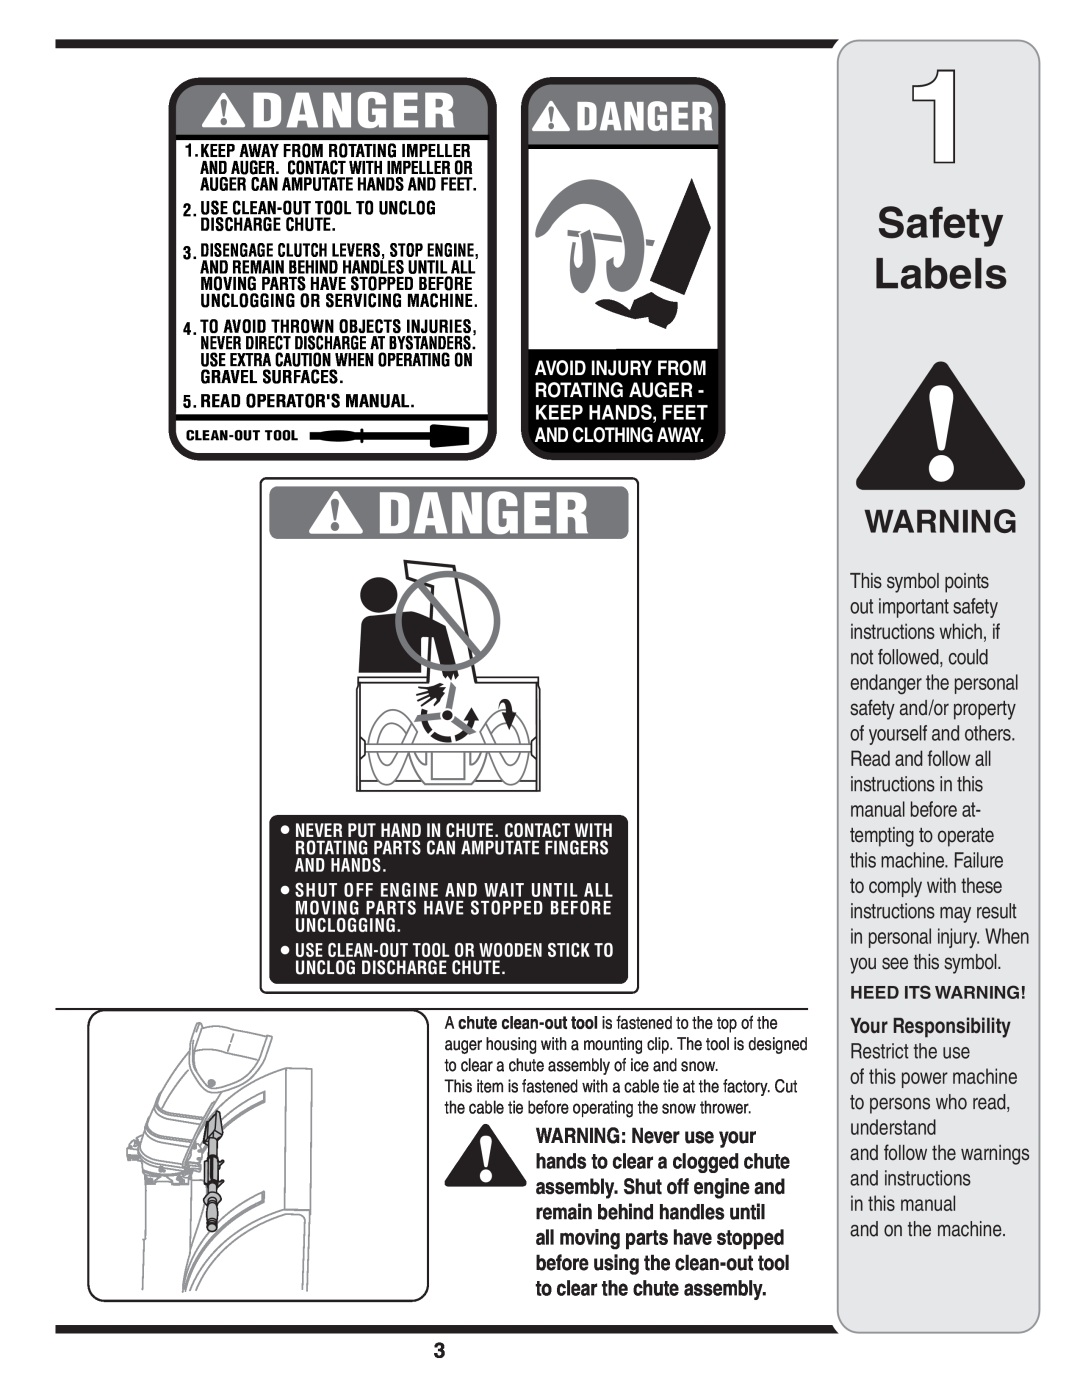 Cub Cadet 933 SWE, 930 SWE Safety Labels, Your Responsibility, Restrict the use, in this manual and on the machine, $!.%2 